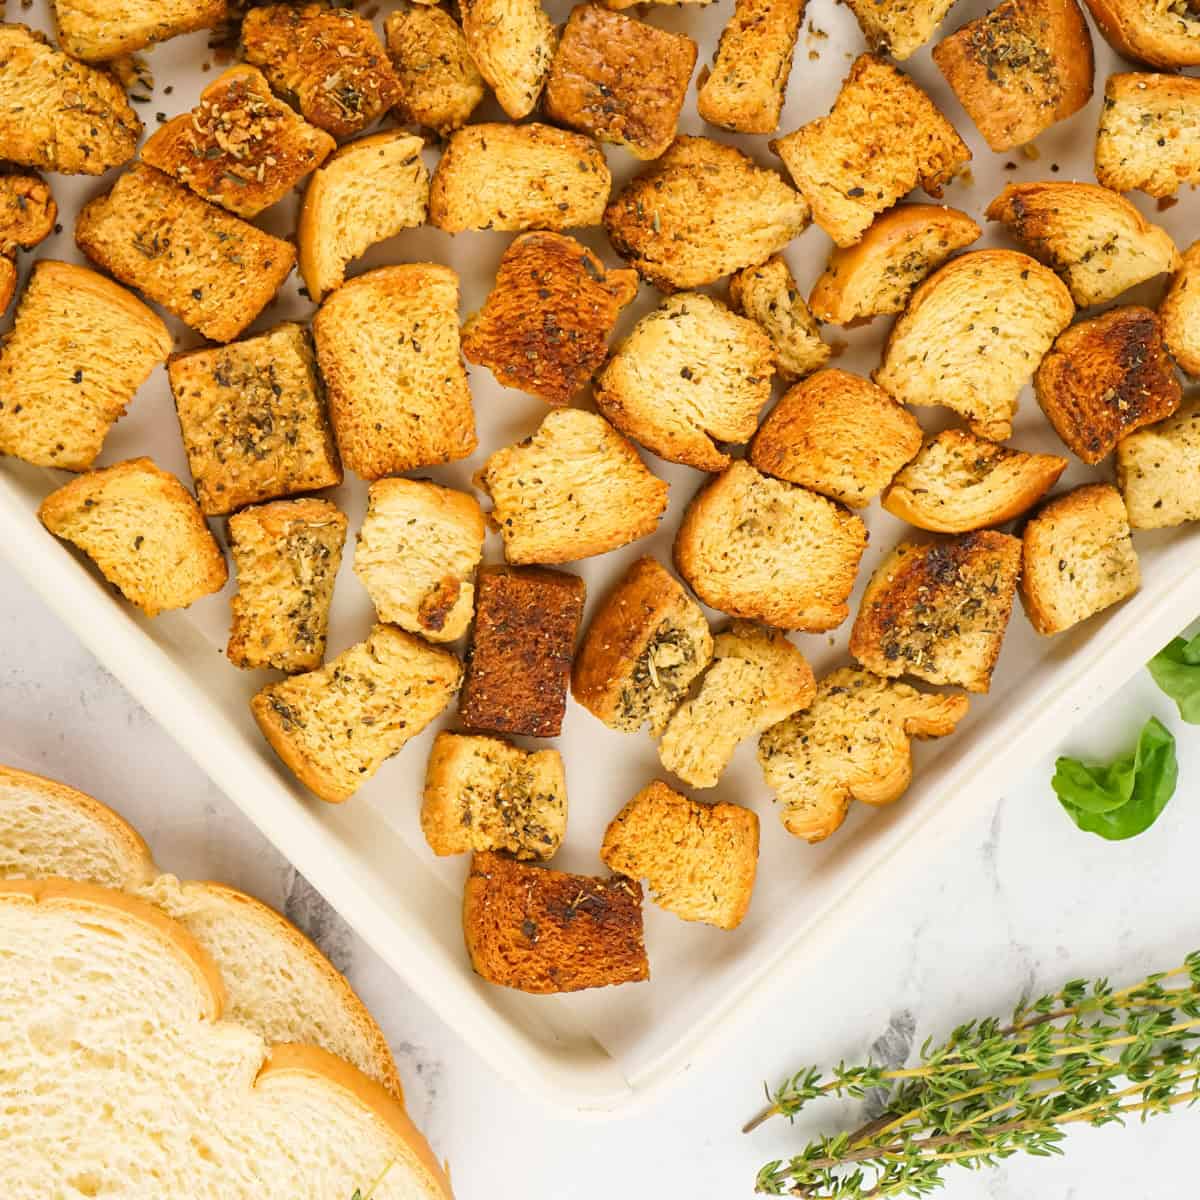 Baked homemade crouton on baking sheet with fresh bread on side.